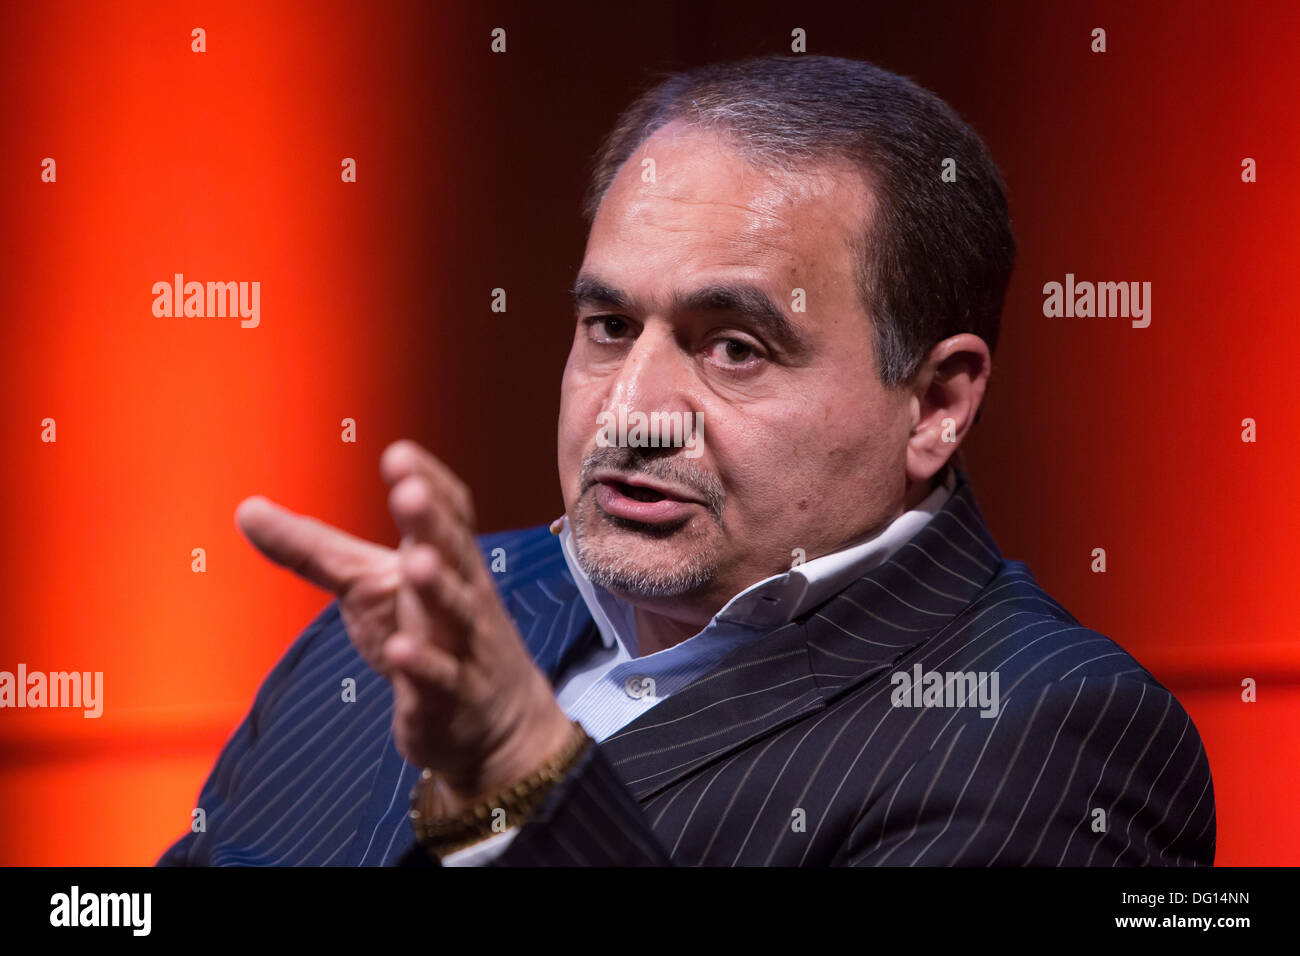 Hamburg, Germany. 10th Oct, 2013. The former Iranian nuclear negotiator Hossein Mousavian speaks during a panel discussion of the Koerber Foundation in Hamburg, Germany, 10 October 2013. Photo: Maja Hitij/dpa/Alamy Live News Stock Photo